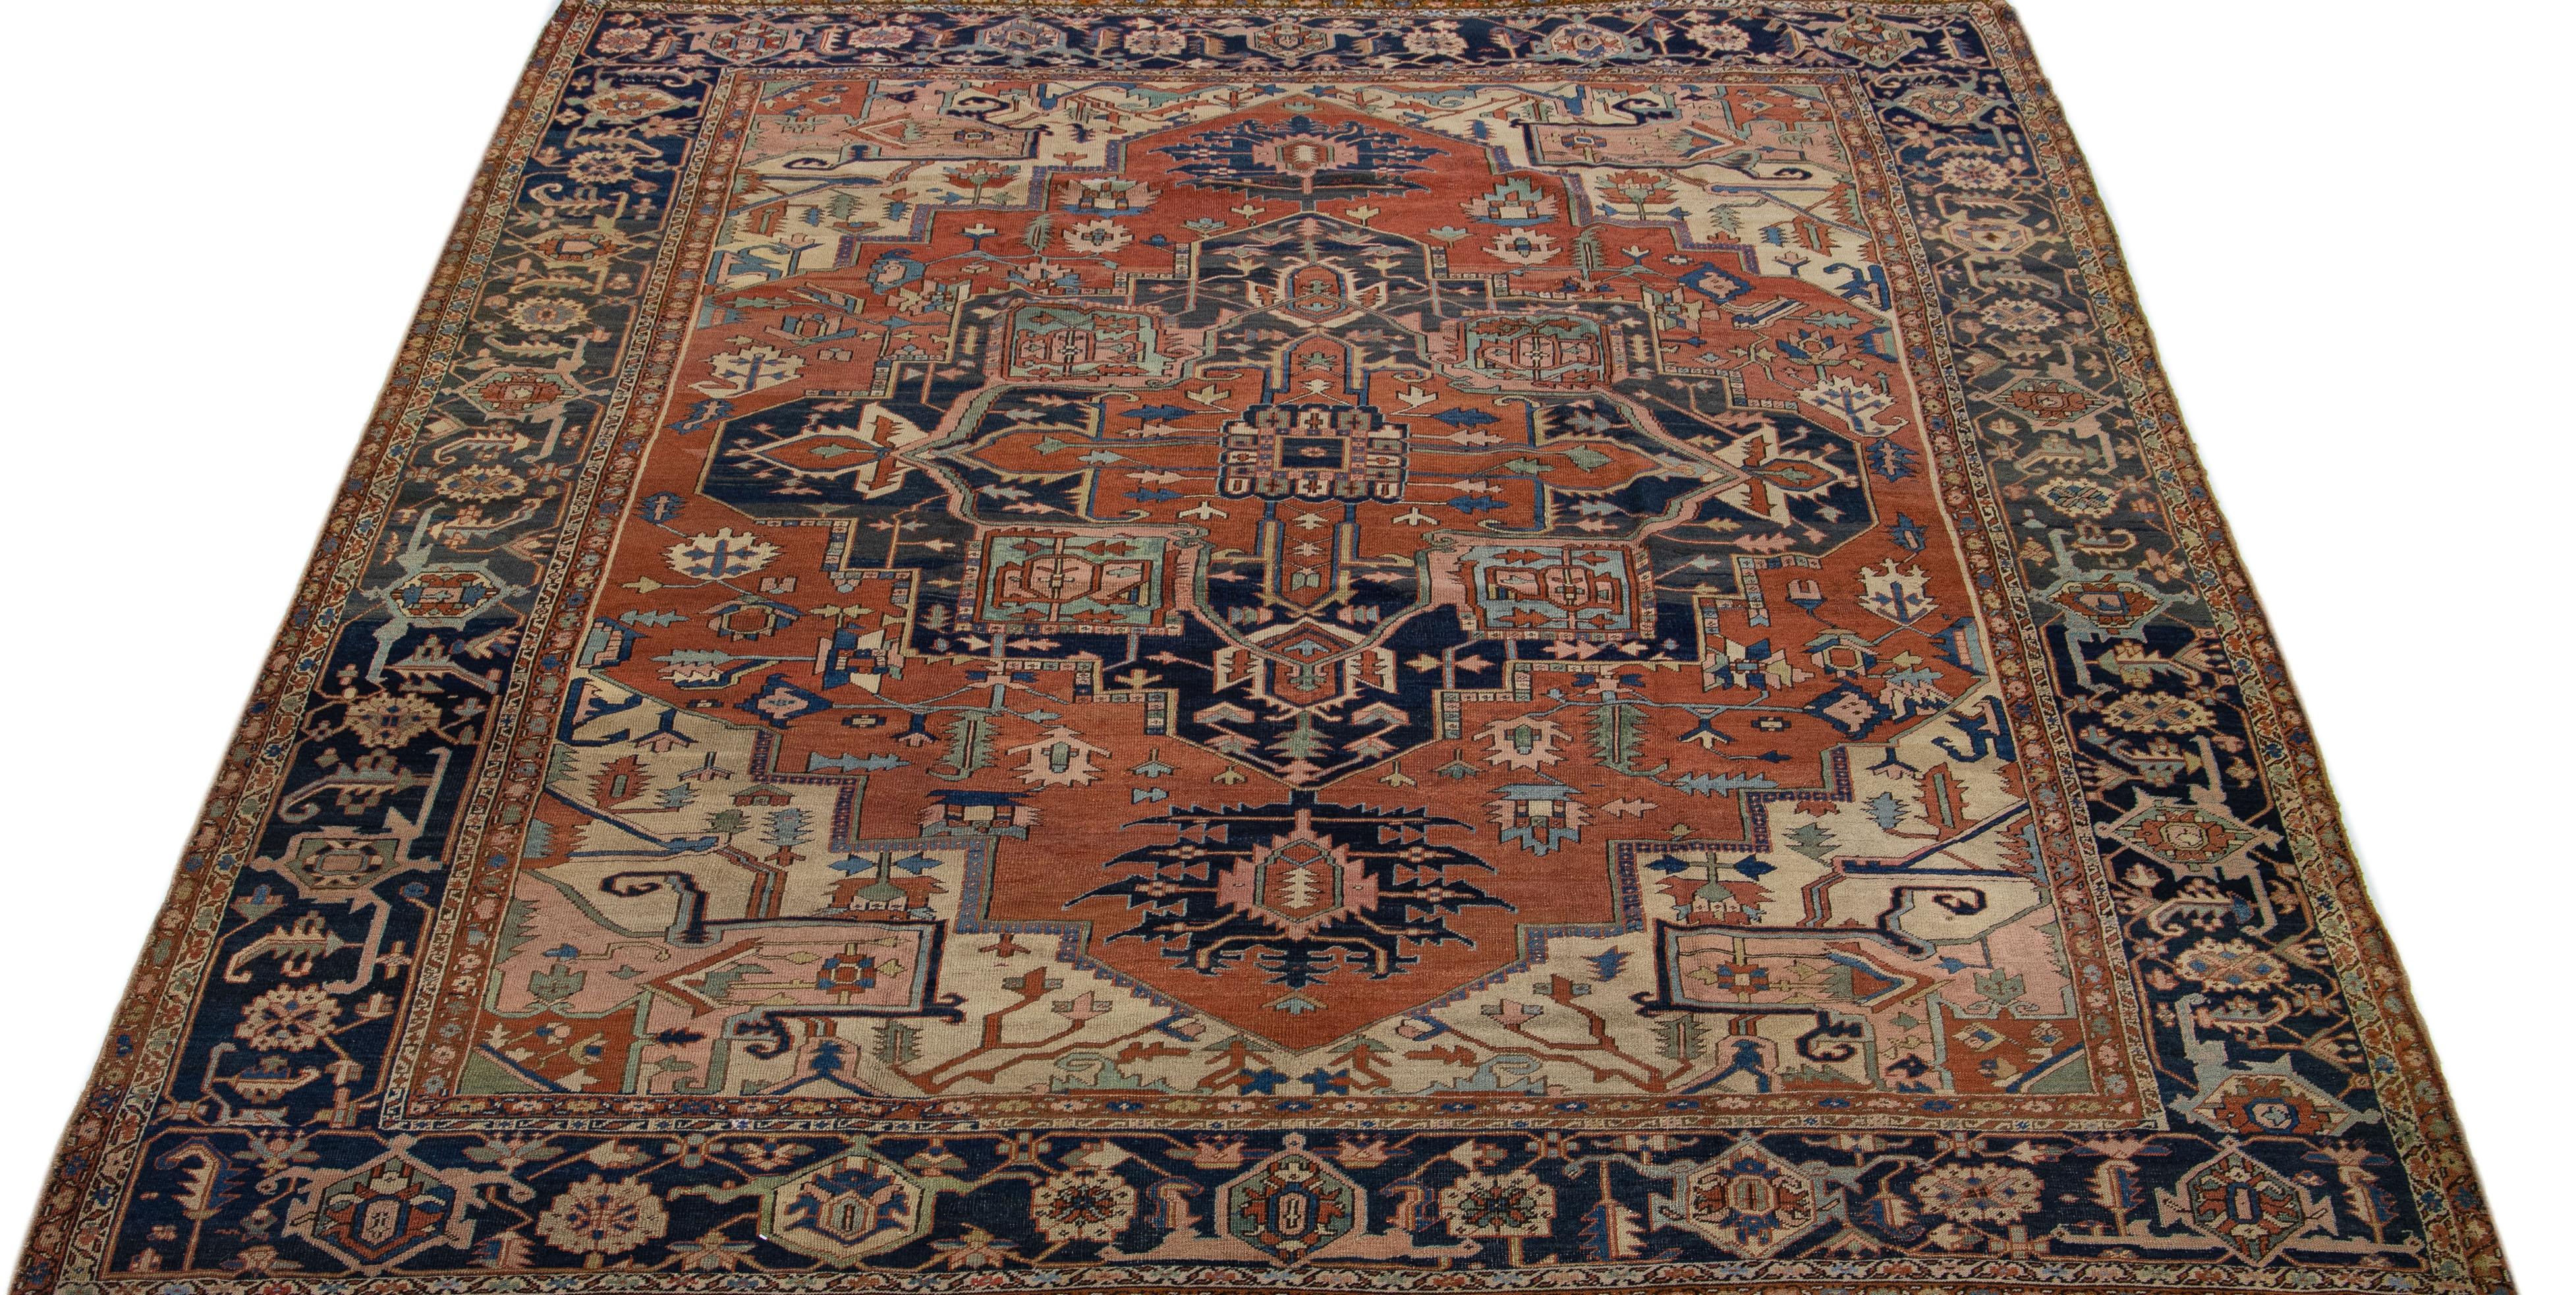 Beautiful antique Heriz hand-knotted wool rug with a rust color field. This Persian rug has a dark-blue designed frame with multicolor accents in a gorgeous medallion floral motif.

This rug measures: 10'3